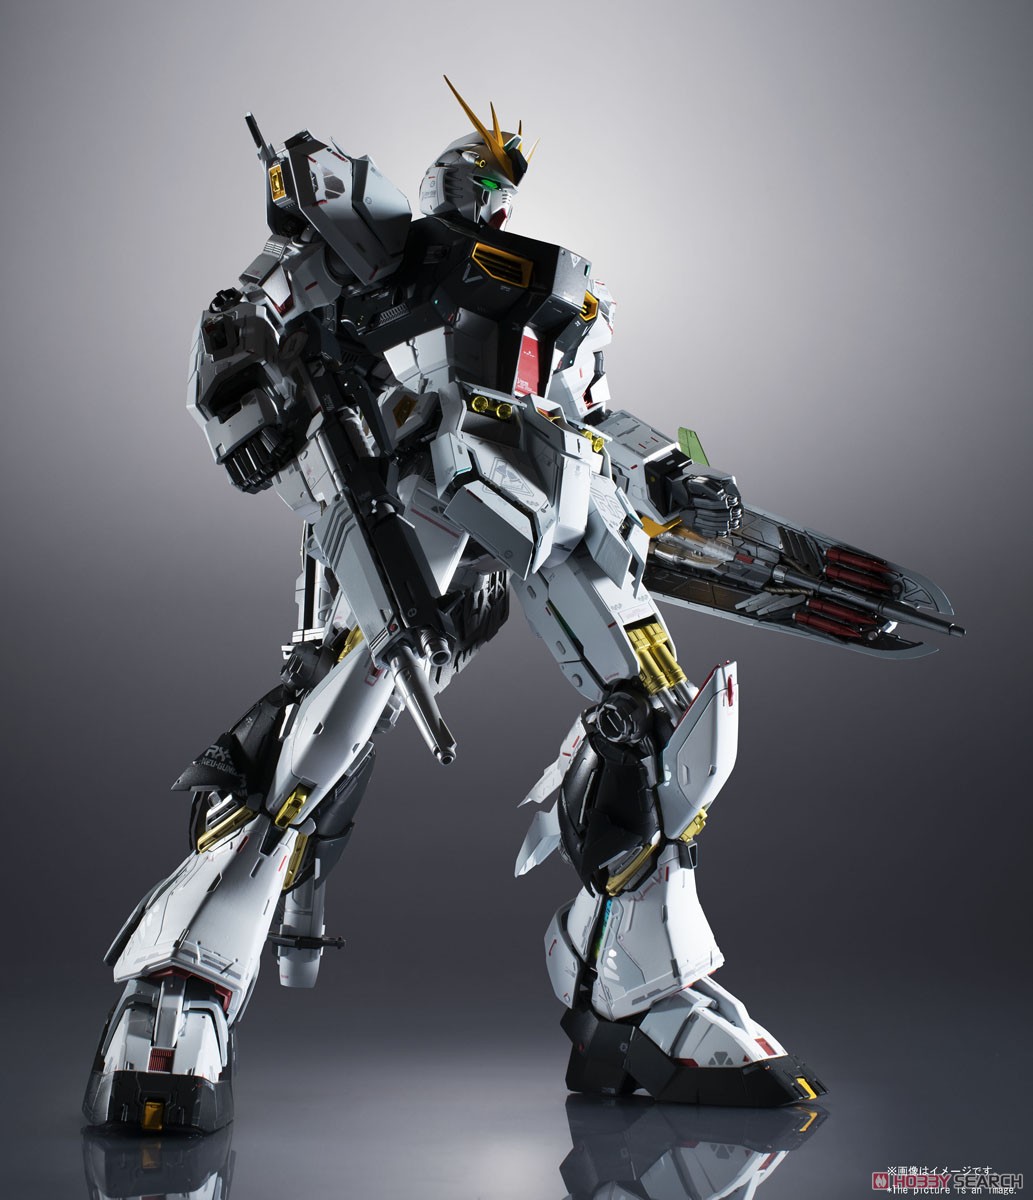 METAL STRUCTURE 解体匠機 RX-93 νガンダム (完成品) 商品画像3